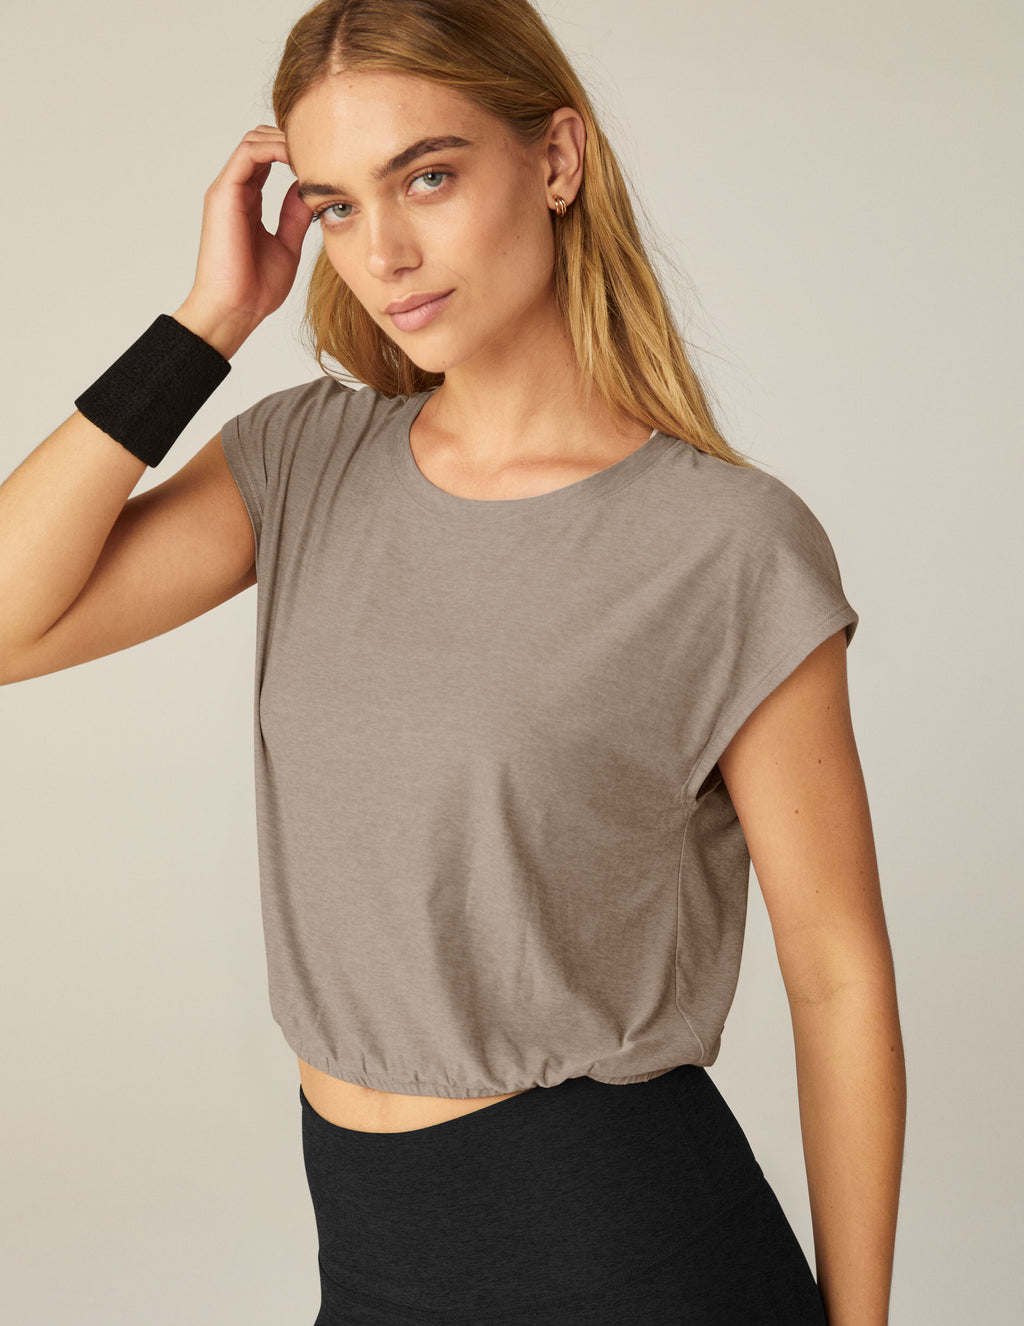 Featherweight Top Priority Cropped Tee Secondary Image